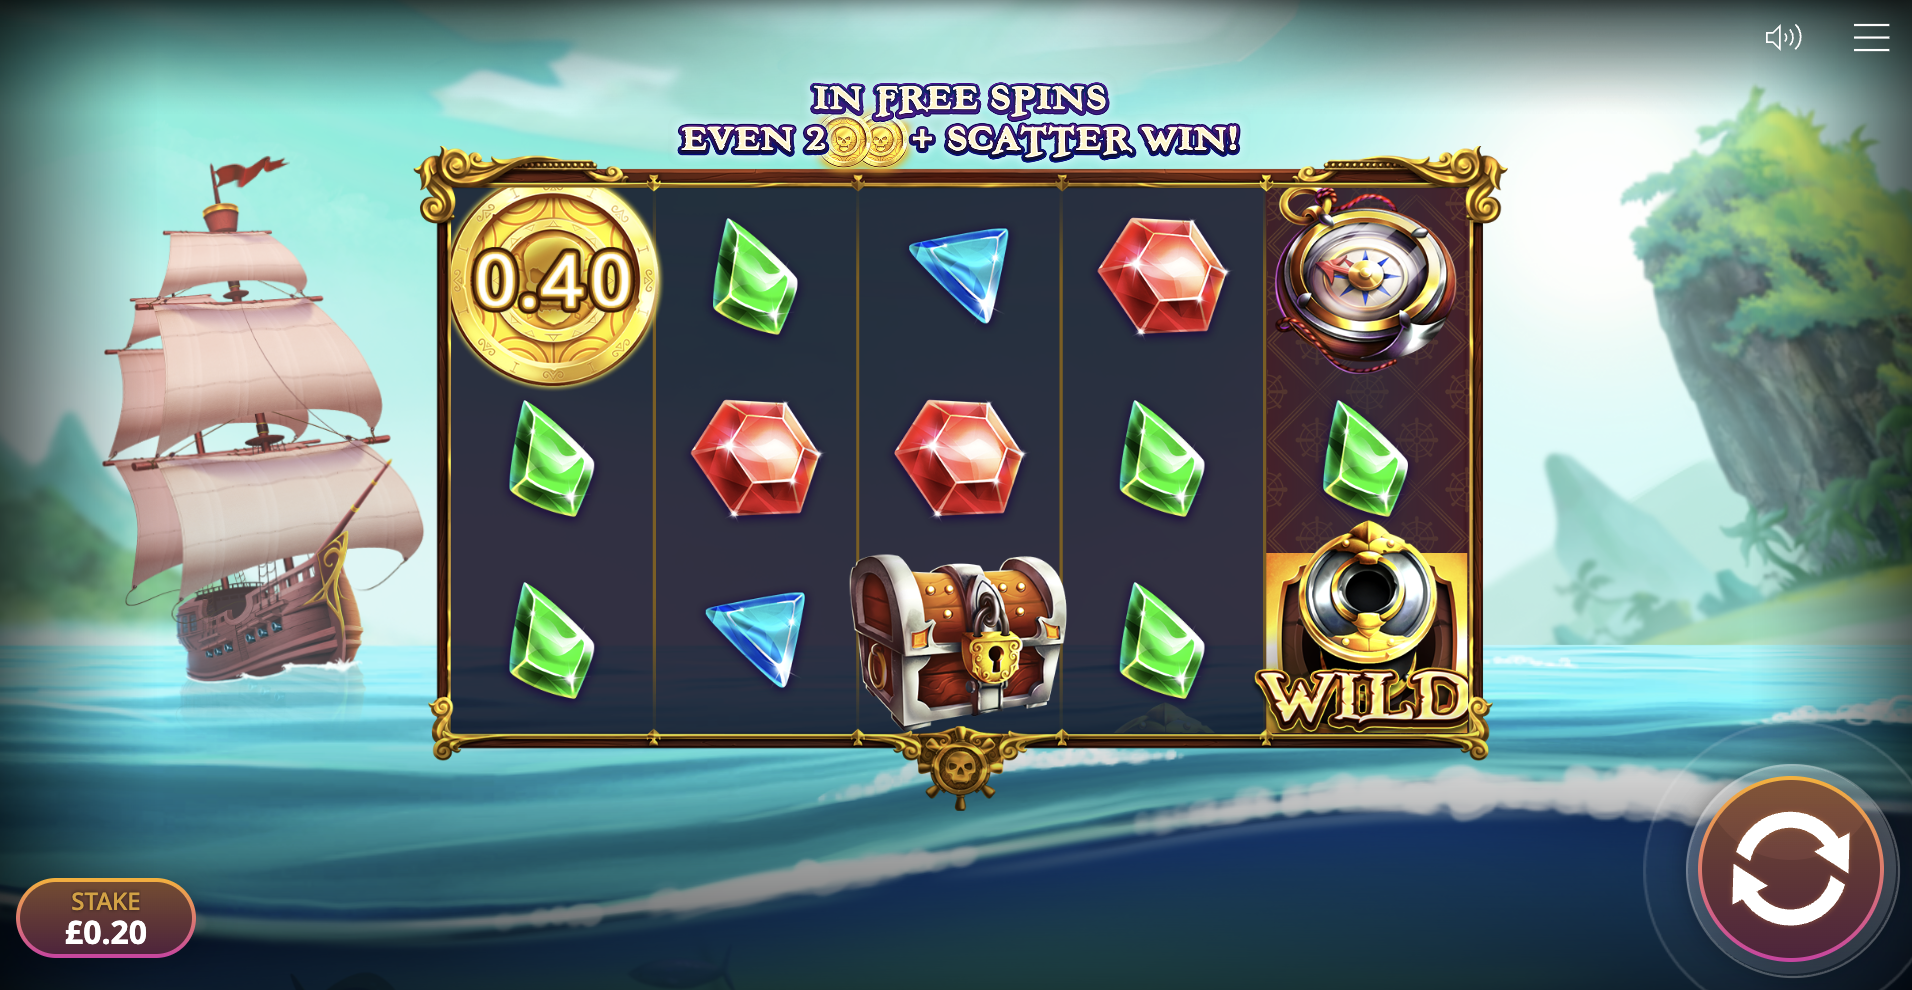 Pirates-Hold-Pirate-Slots-Games